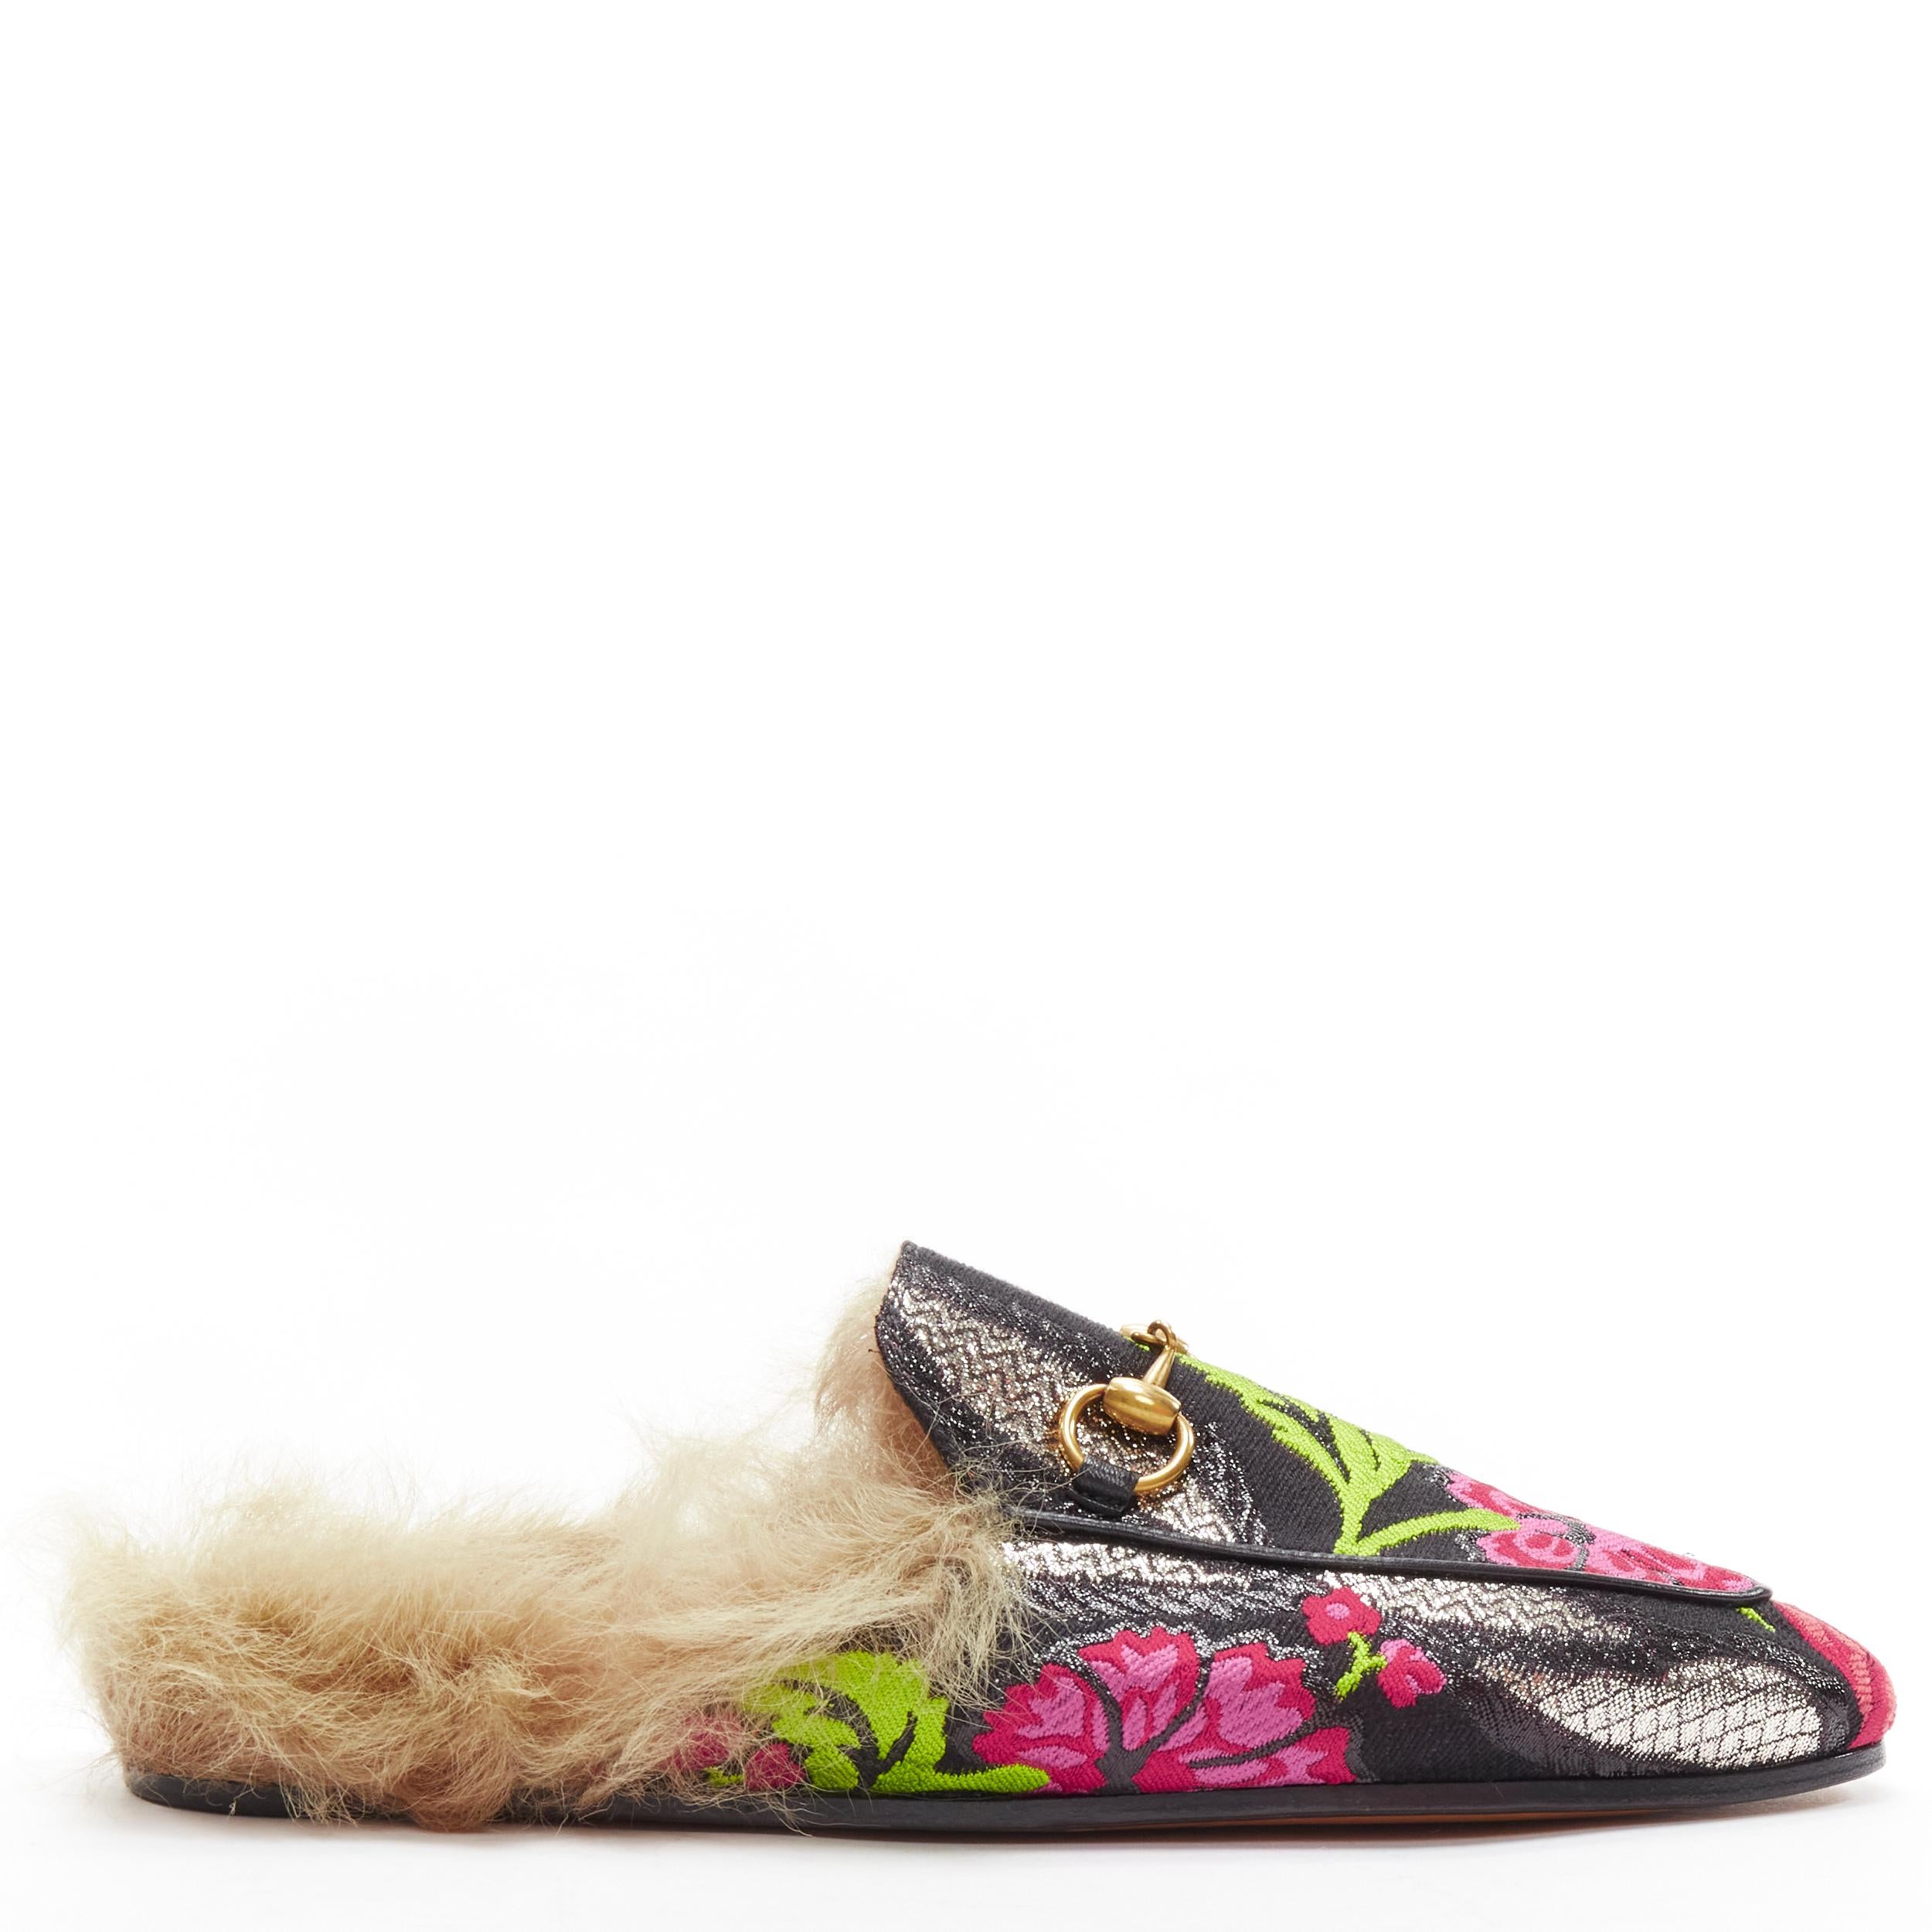 GUCCI Princetown pink floral brocade jacquard fur lined loafer slippers EU37
Reference: TGAS/B02021
Brand: Gucci
Designer: Alessandro Michele
Model: Princetown
Material: Fabric
Color: Multicolour
Pattern: Floral
Closure: Slip On
Lining: Faux